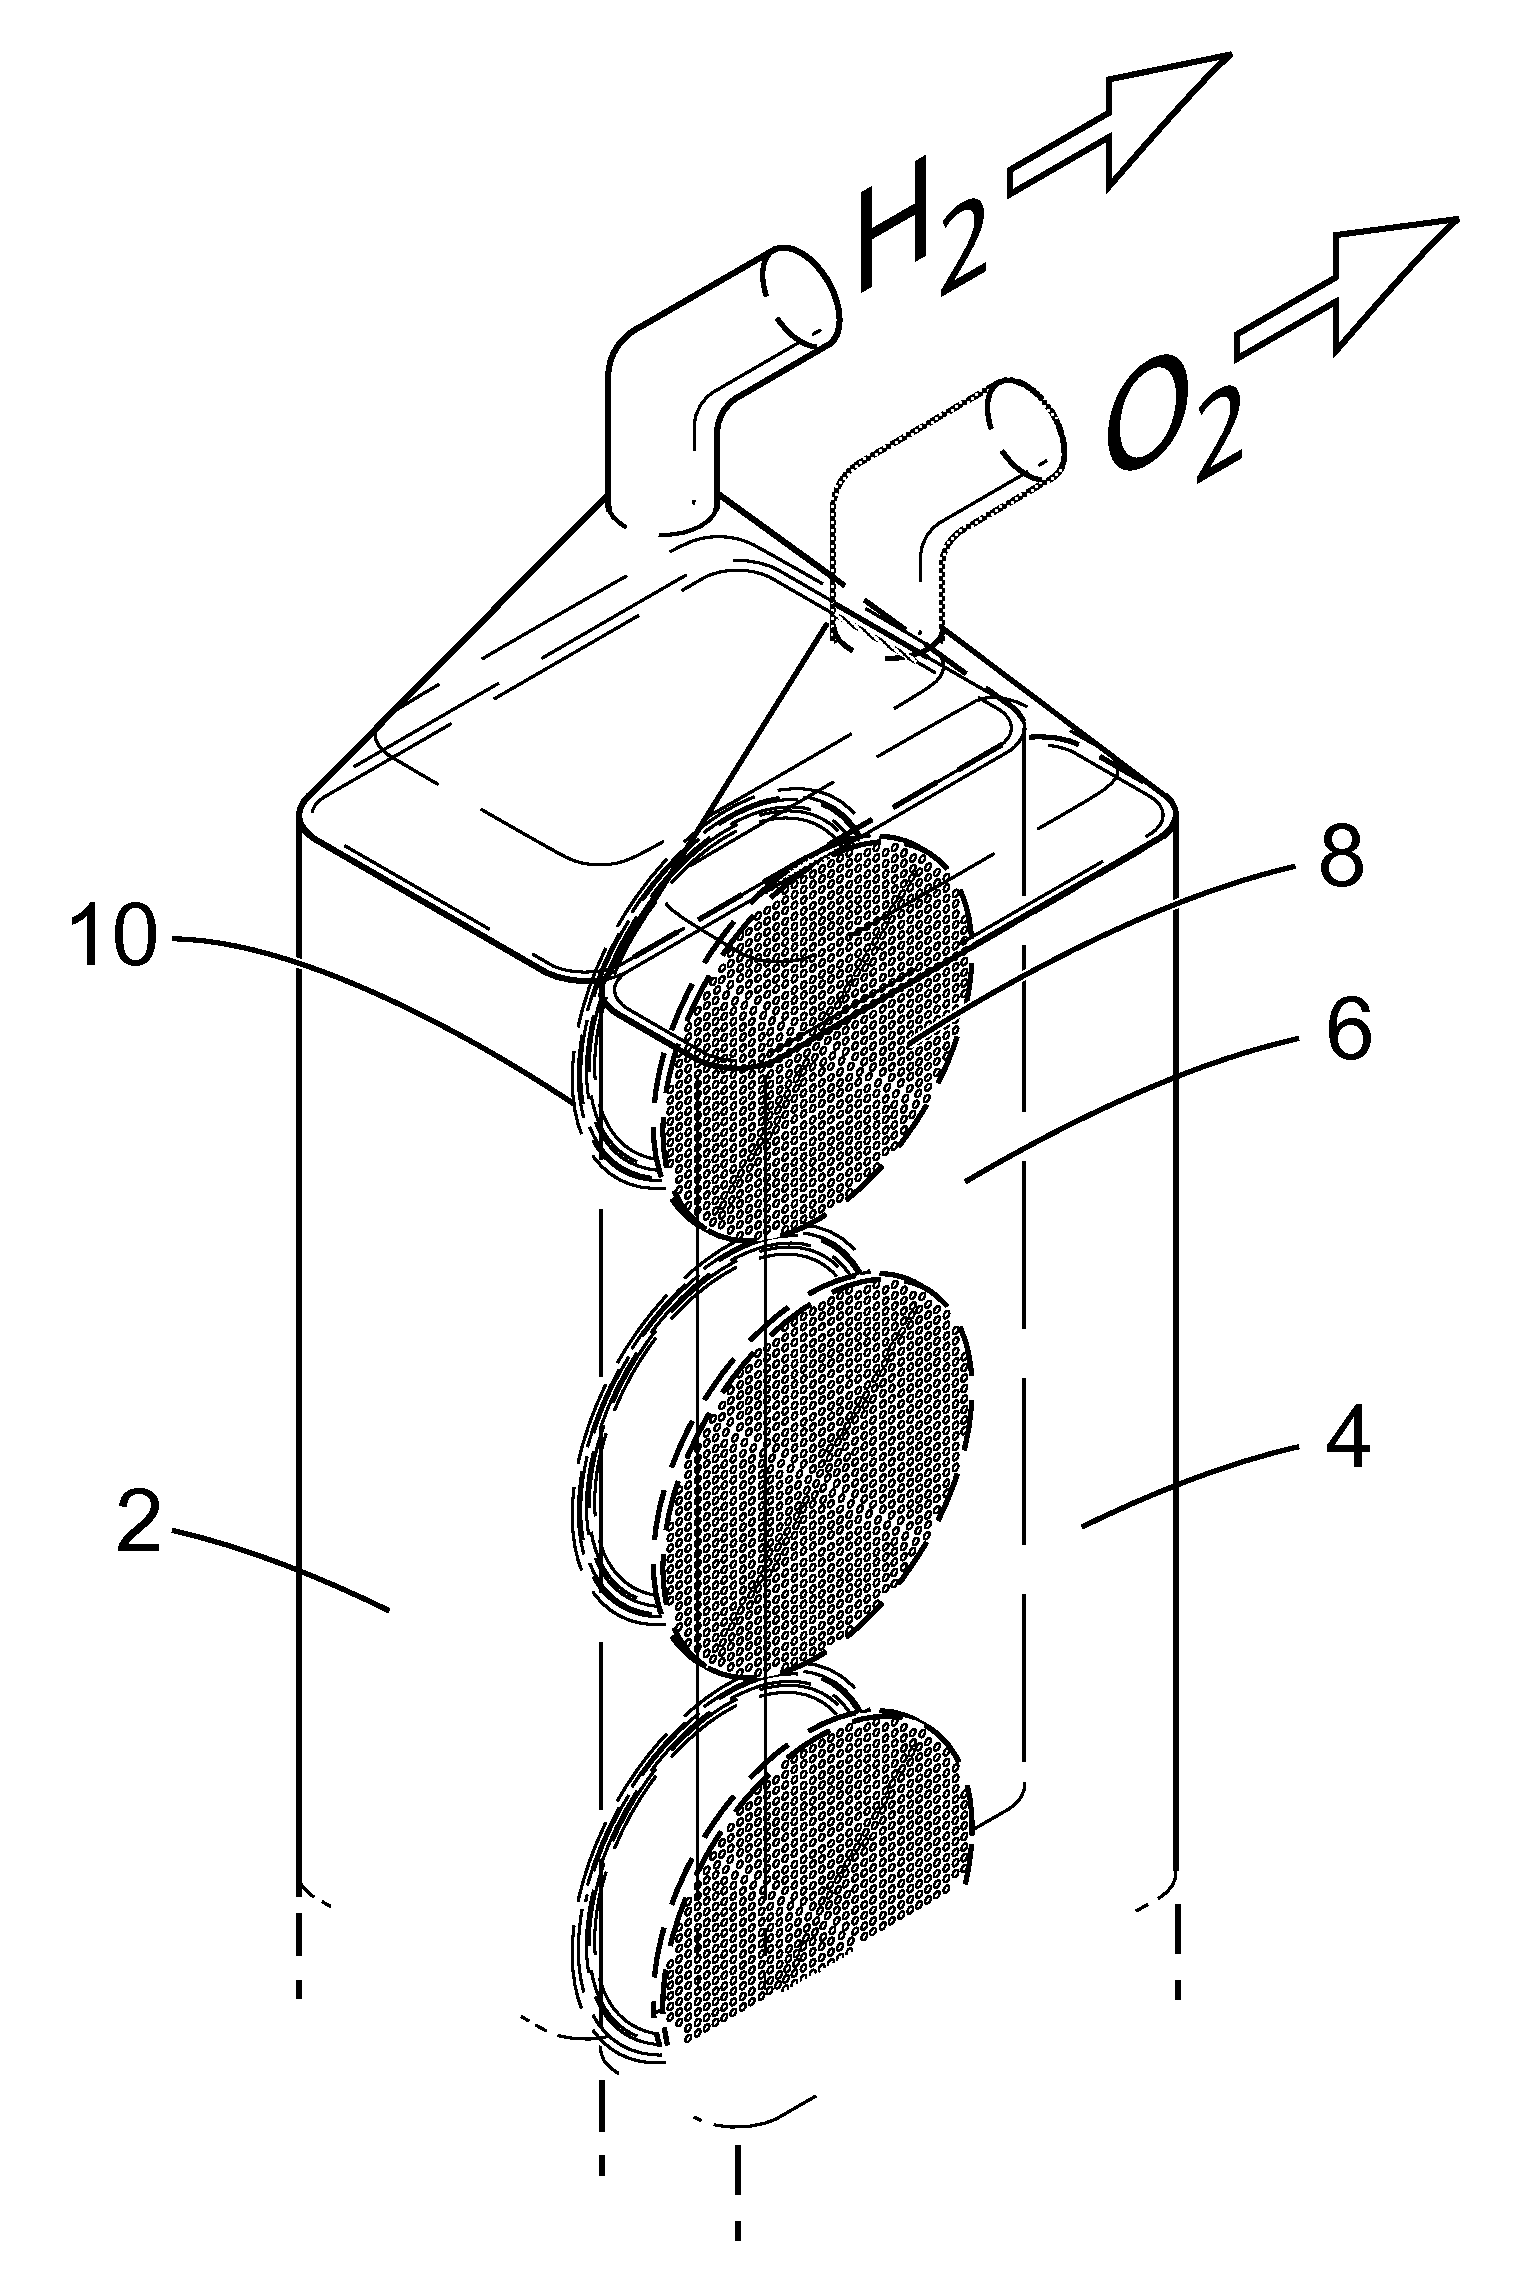 Apparatus and Method for the Electrolysis of Water